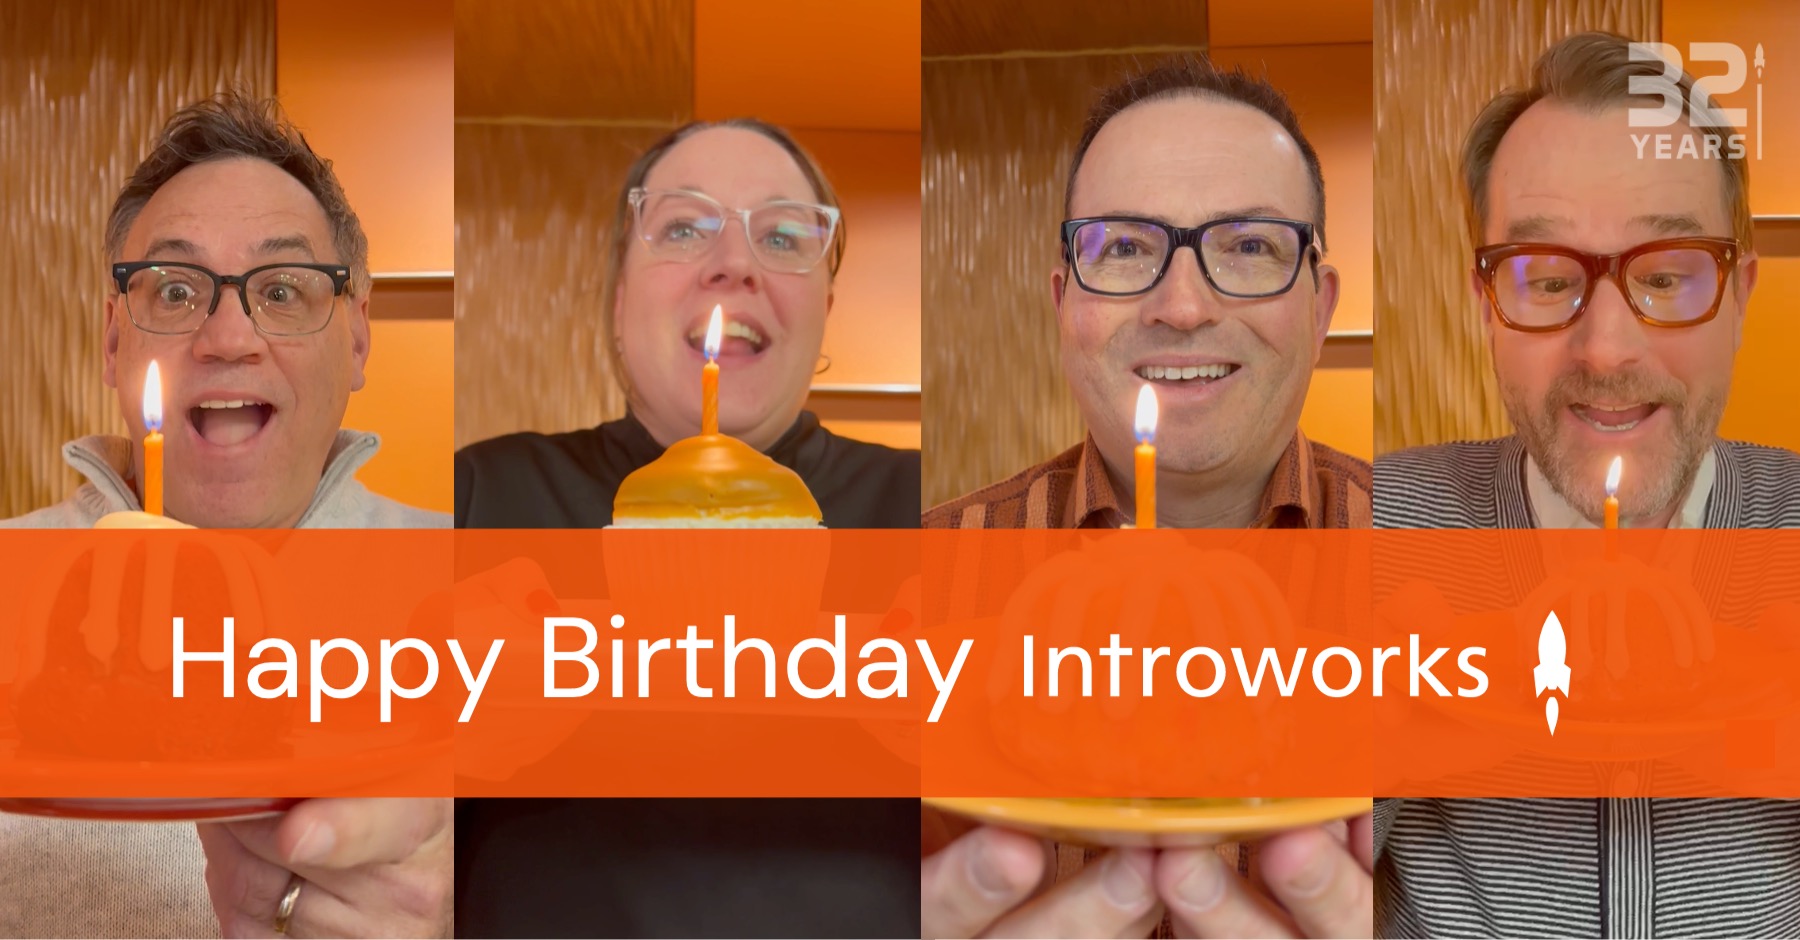 Celebrating 32 Years of Introworks